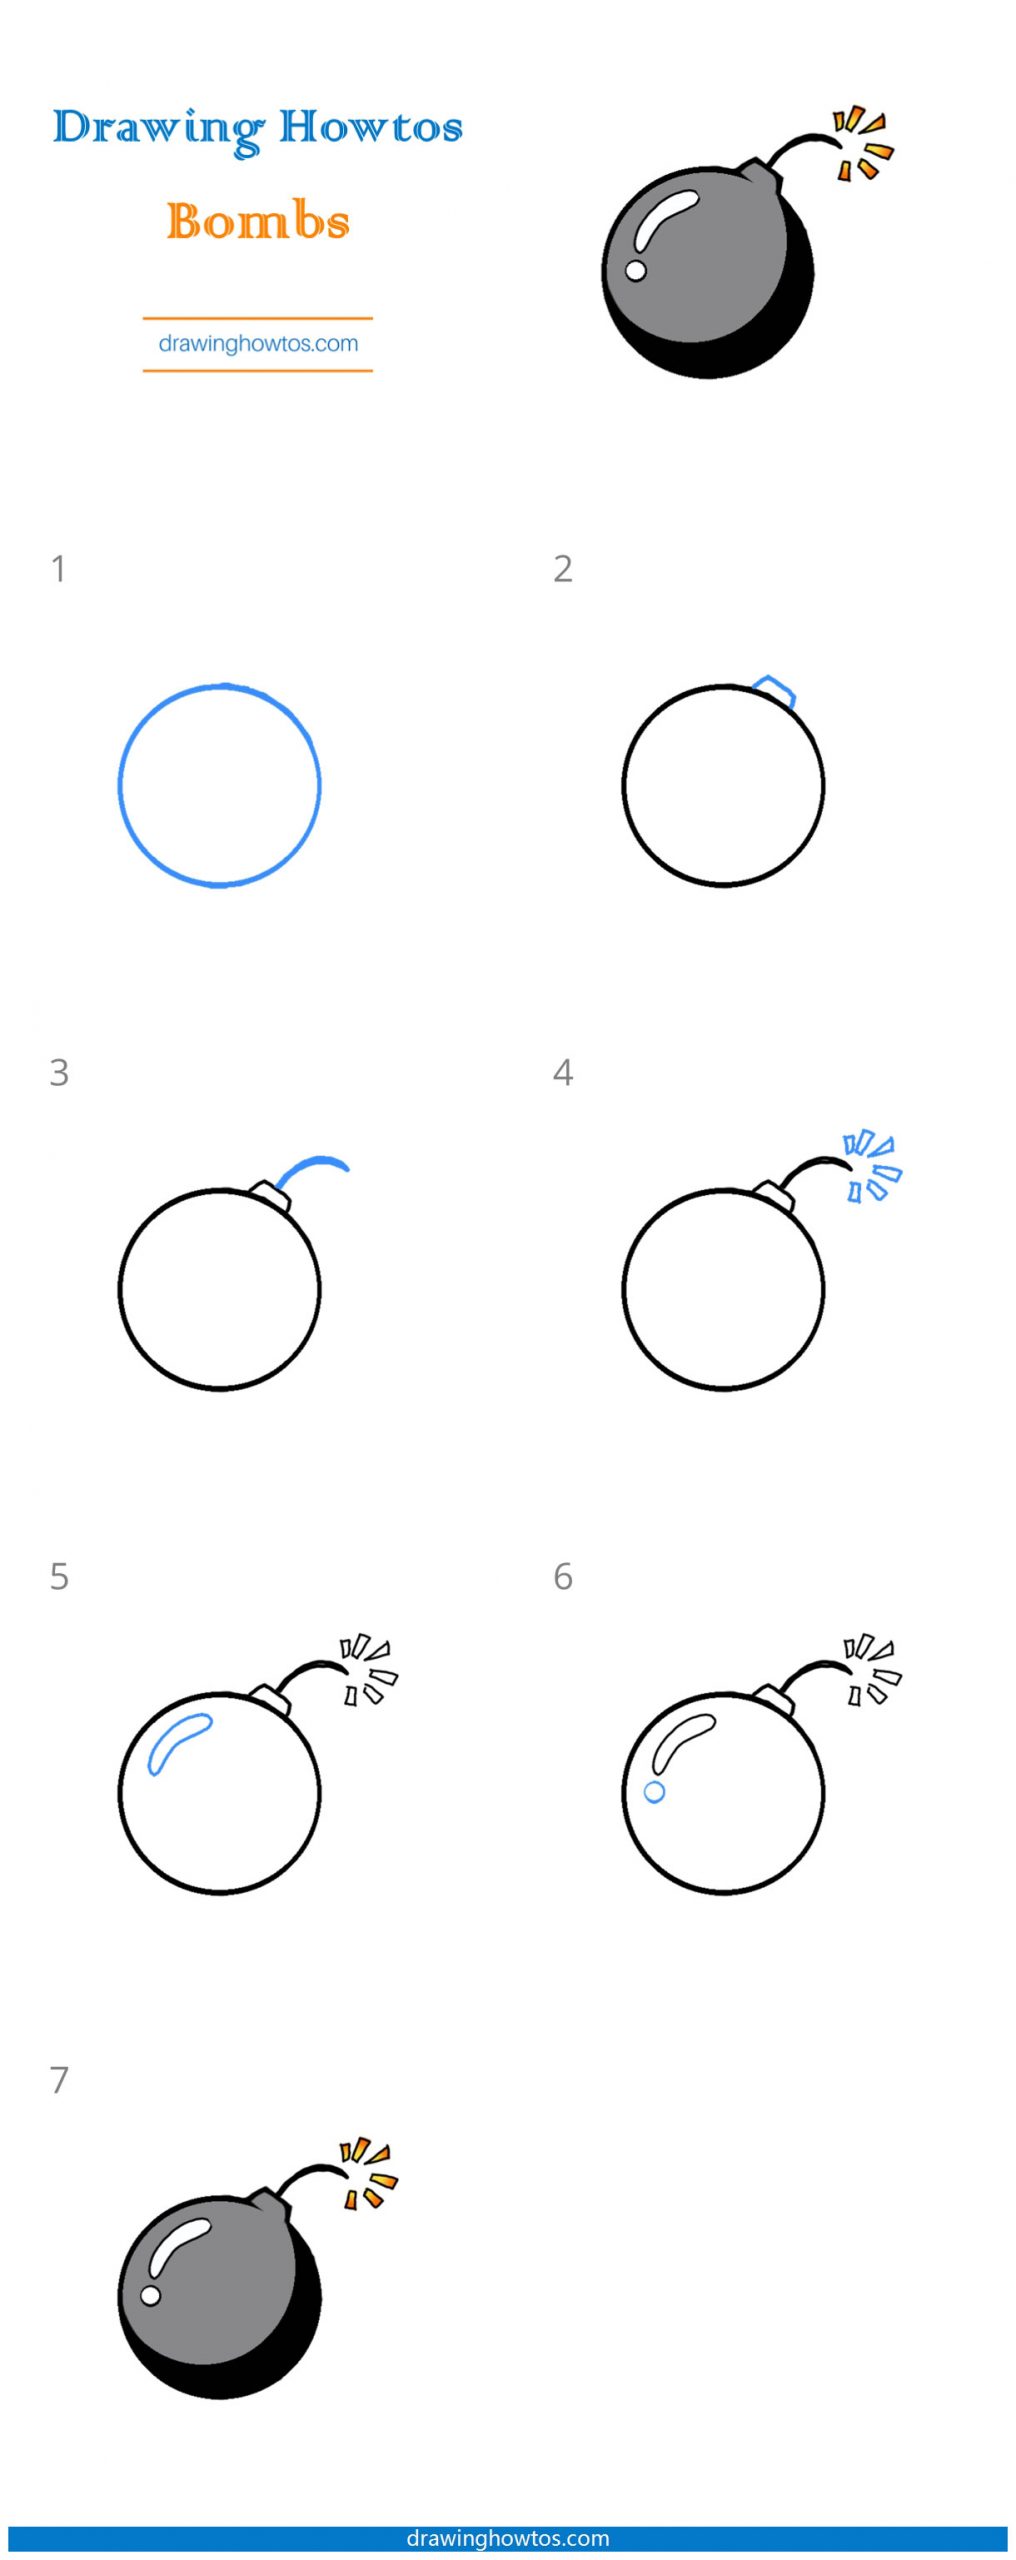 How to Draw a Bomb Step by Step